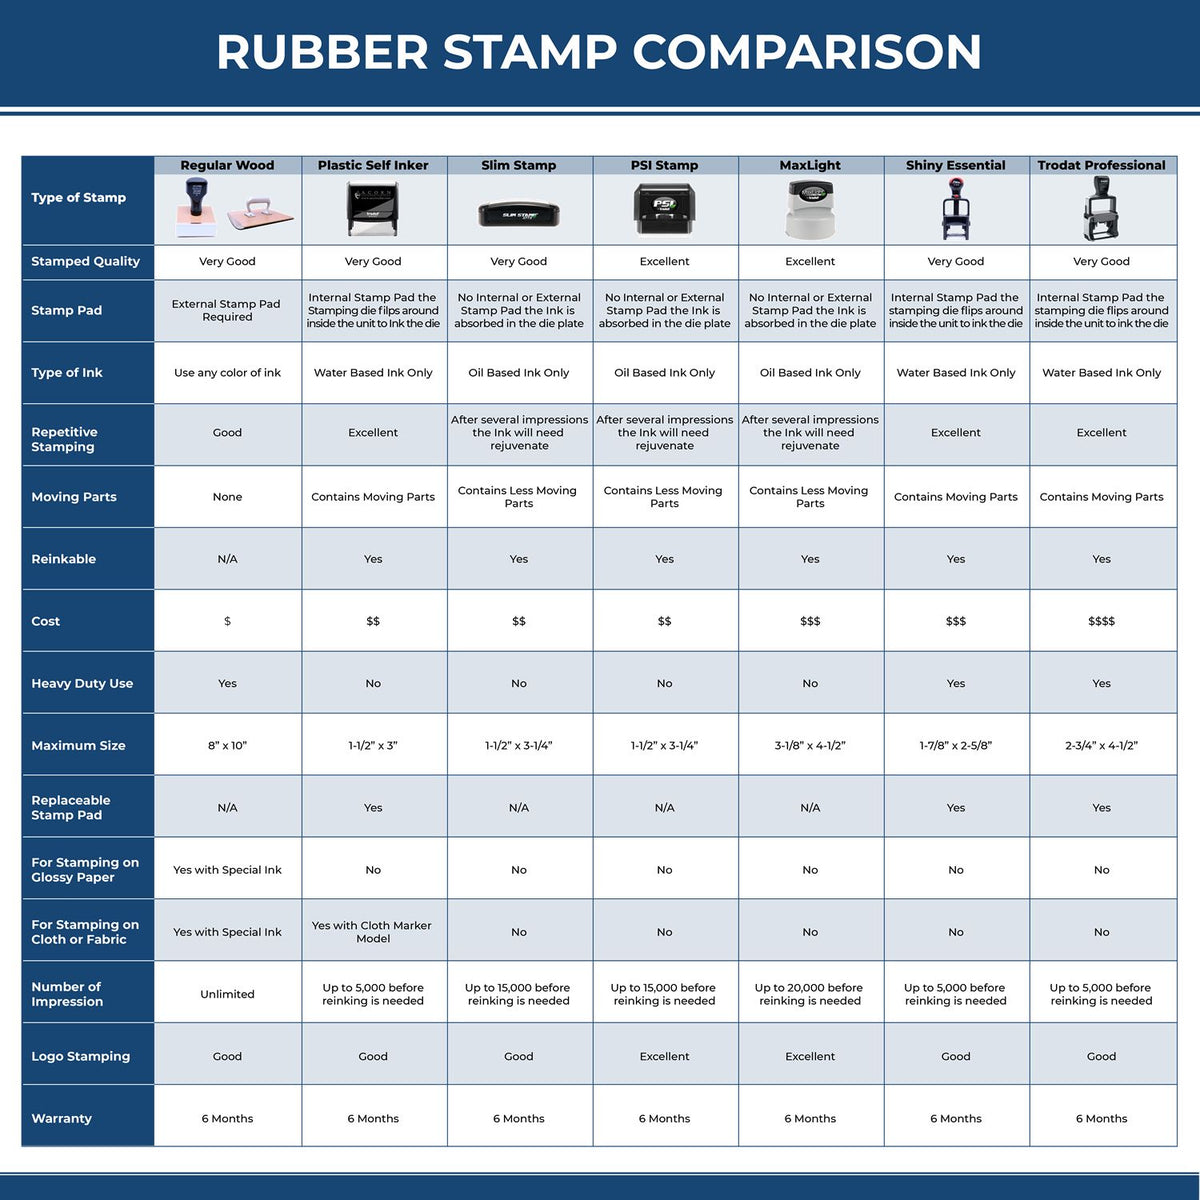 A comparison chart for the different types of mount models available for the Self-Inking Washington PE Stamp.